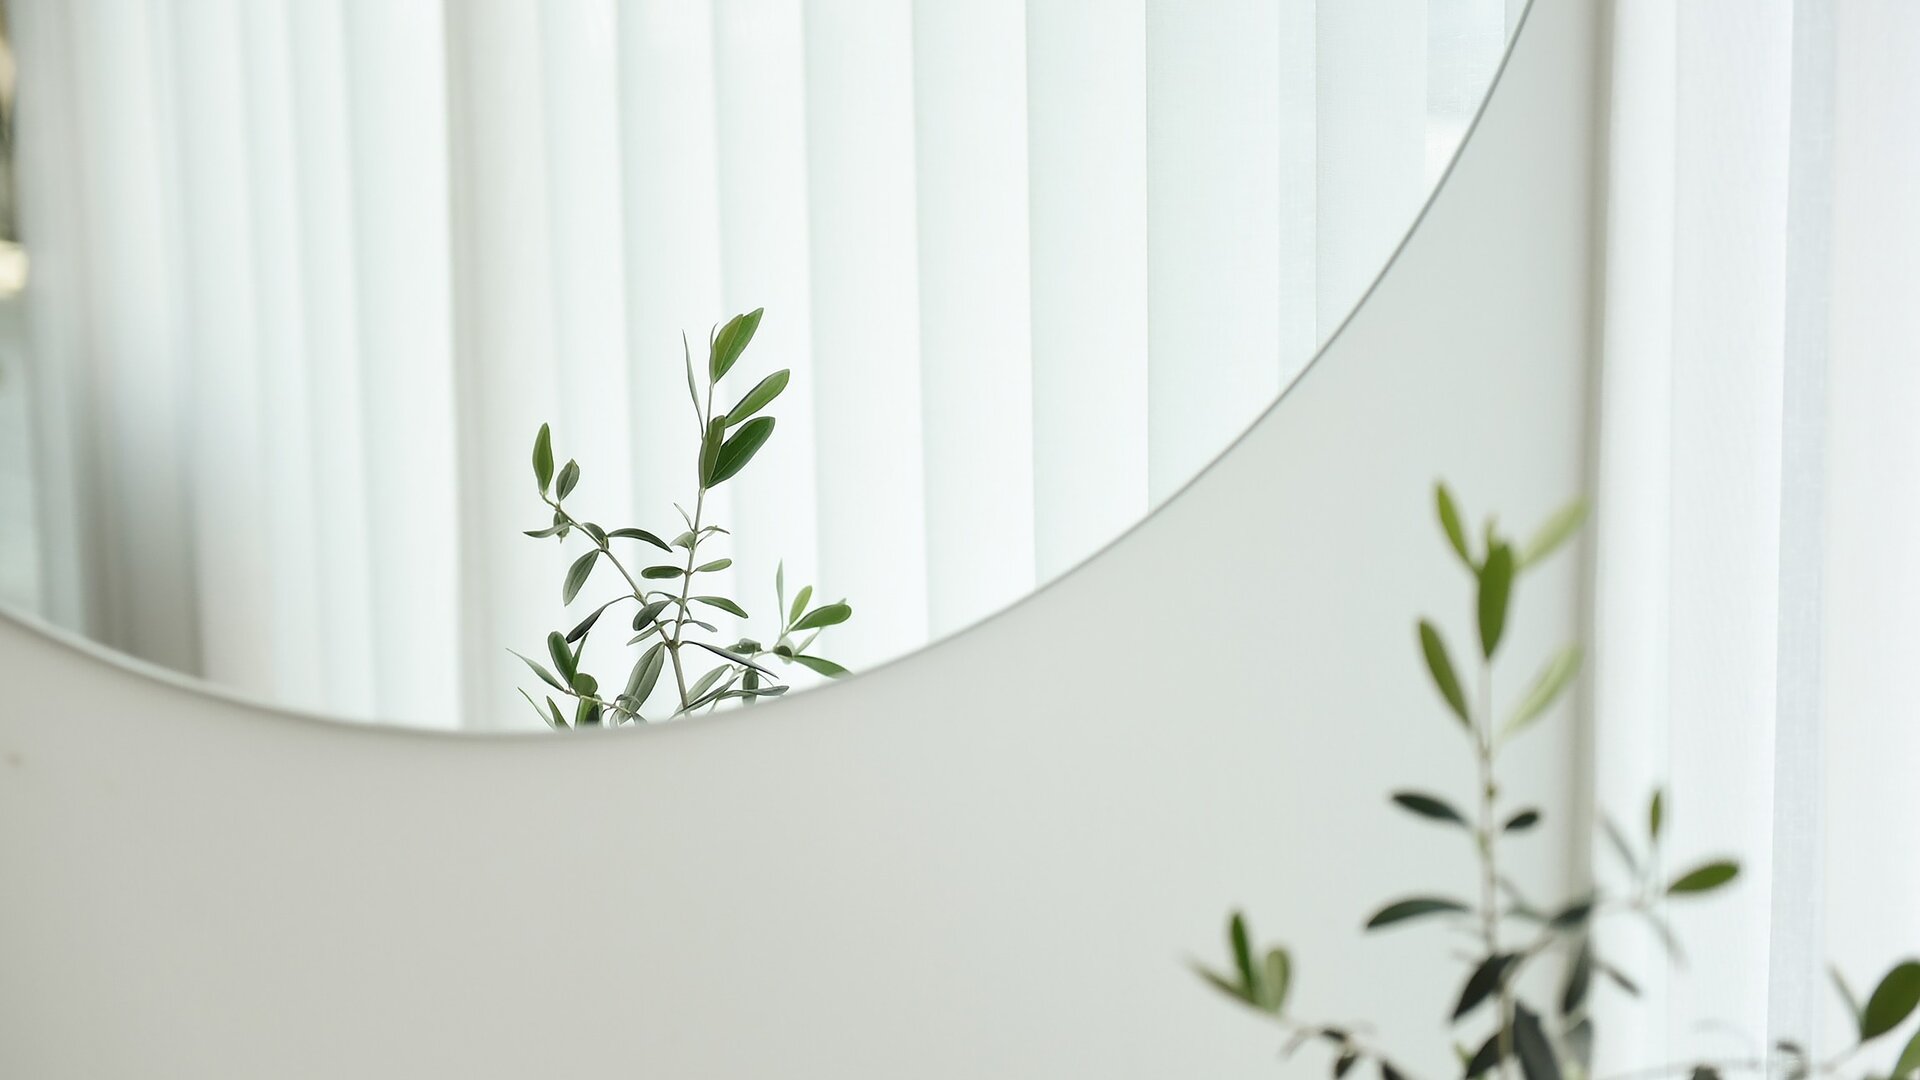 Close-up of lower part of round mirror on white wall with reflection of plant leaves.